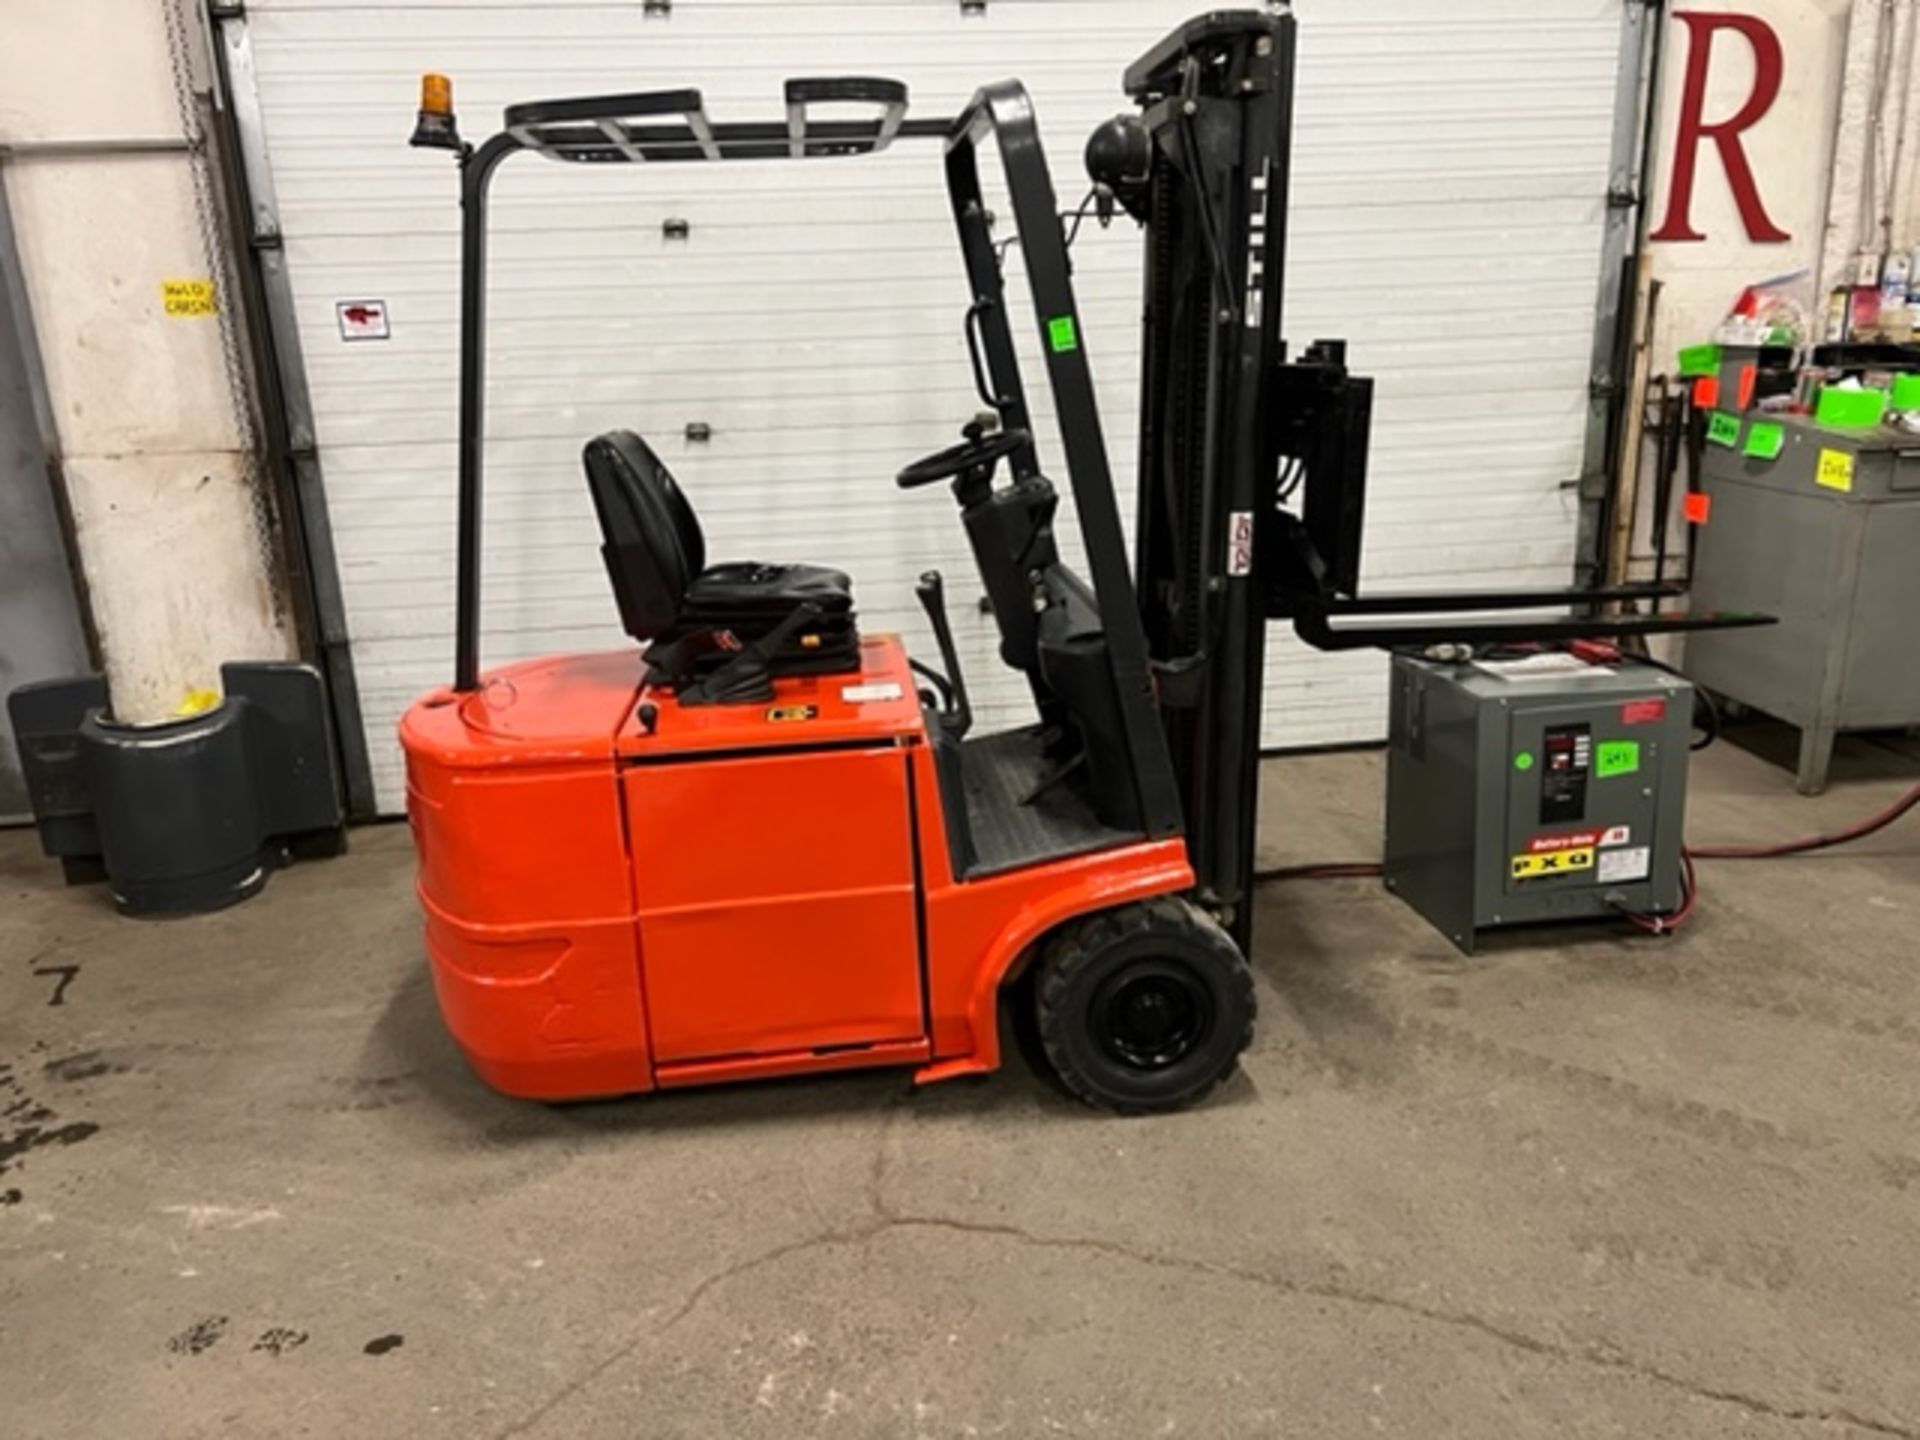 FREE CUSTOMS - NICE STILL 3,000lbs Capacity 3-wheel Forklift model R50-15 Electric with 3-stage mast